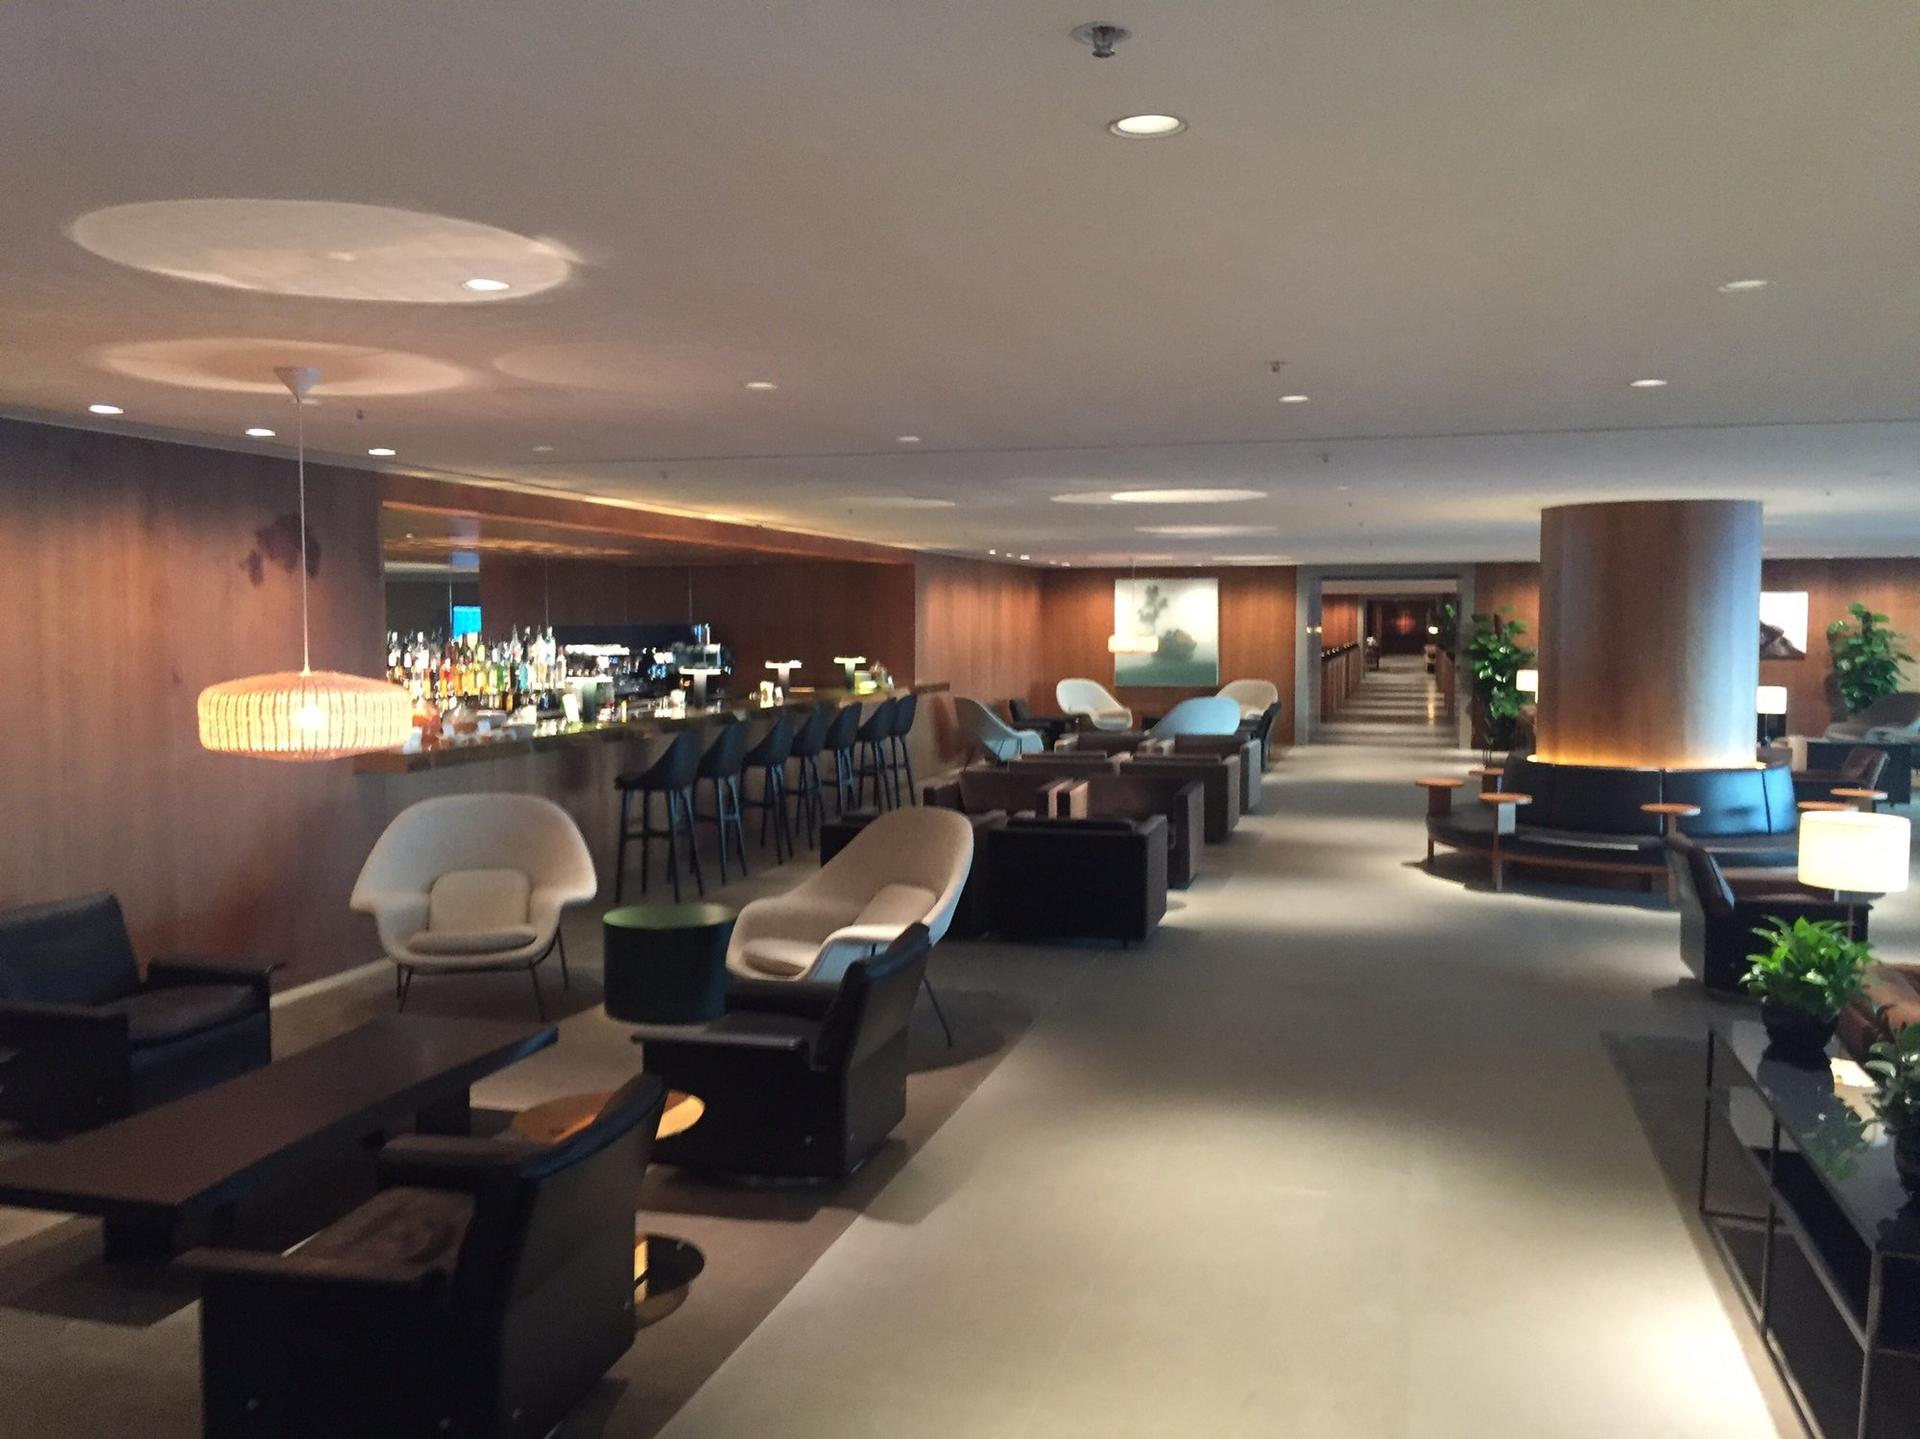 Cathay Pacific The Pier Business Class Lounge image 16 of 61